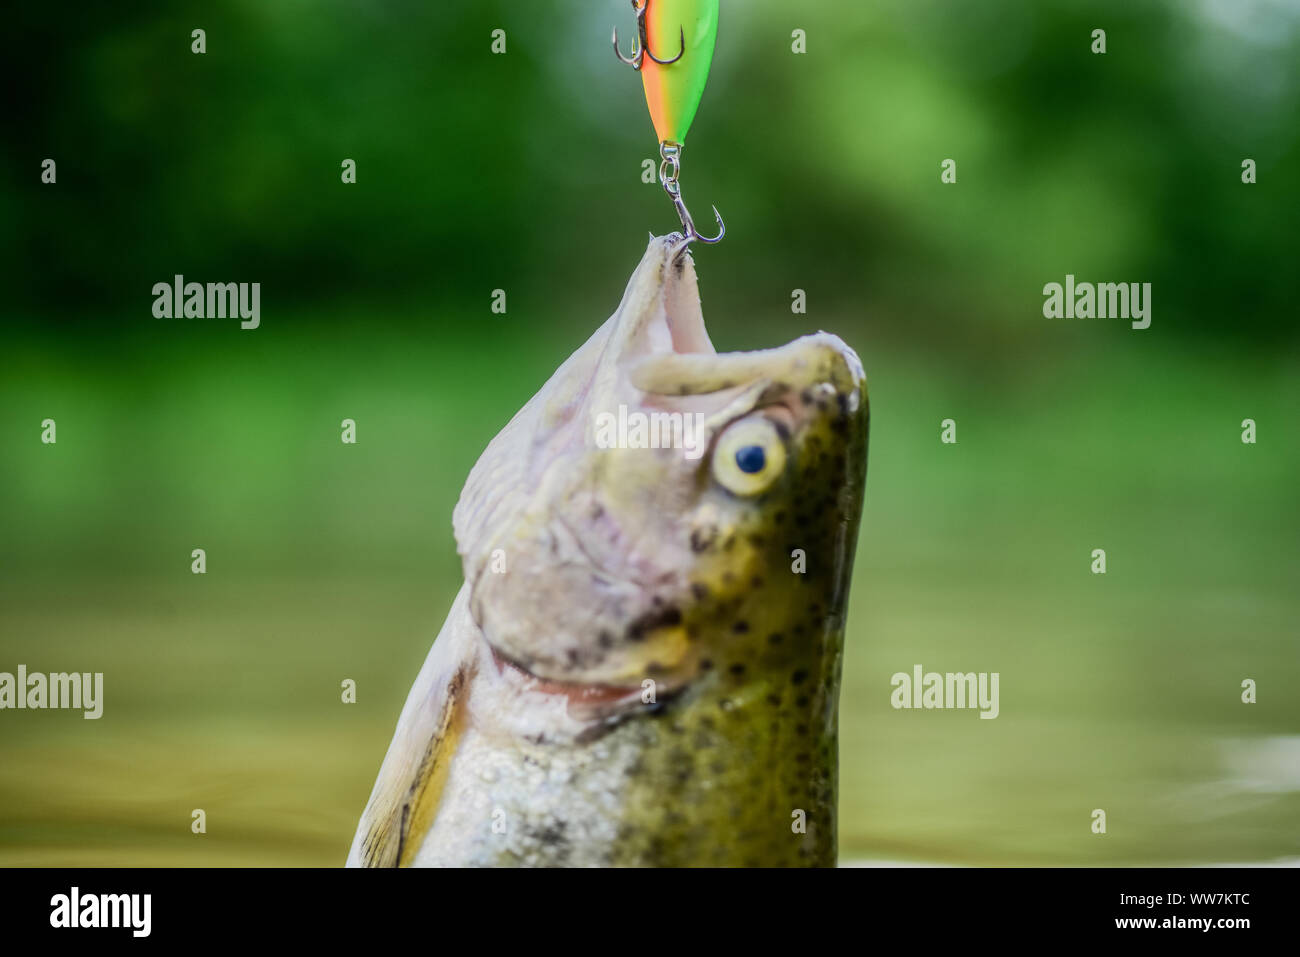 Fish trout caught in freshwater. Bait spoon line fishing accessories. Fish  in trap close up. Victim of poaching. Save nature. On hook. Silence  concept. Fish open mouth hang on hook. fishing equipment